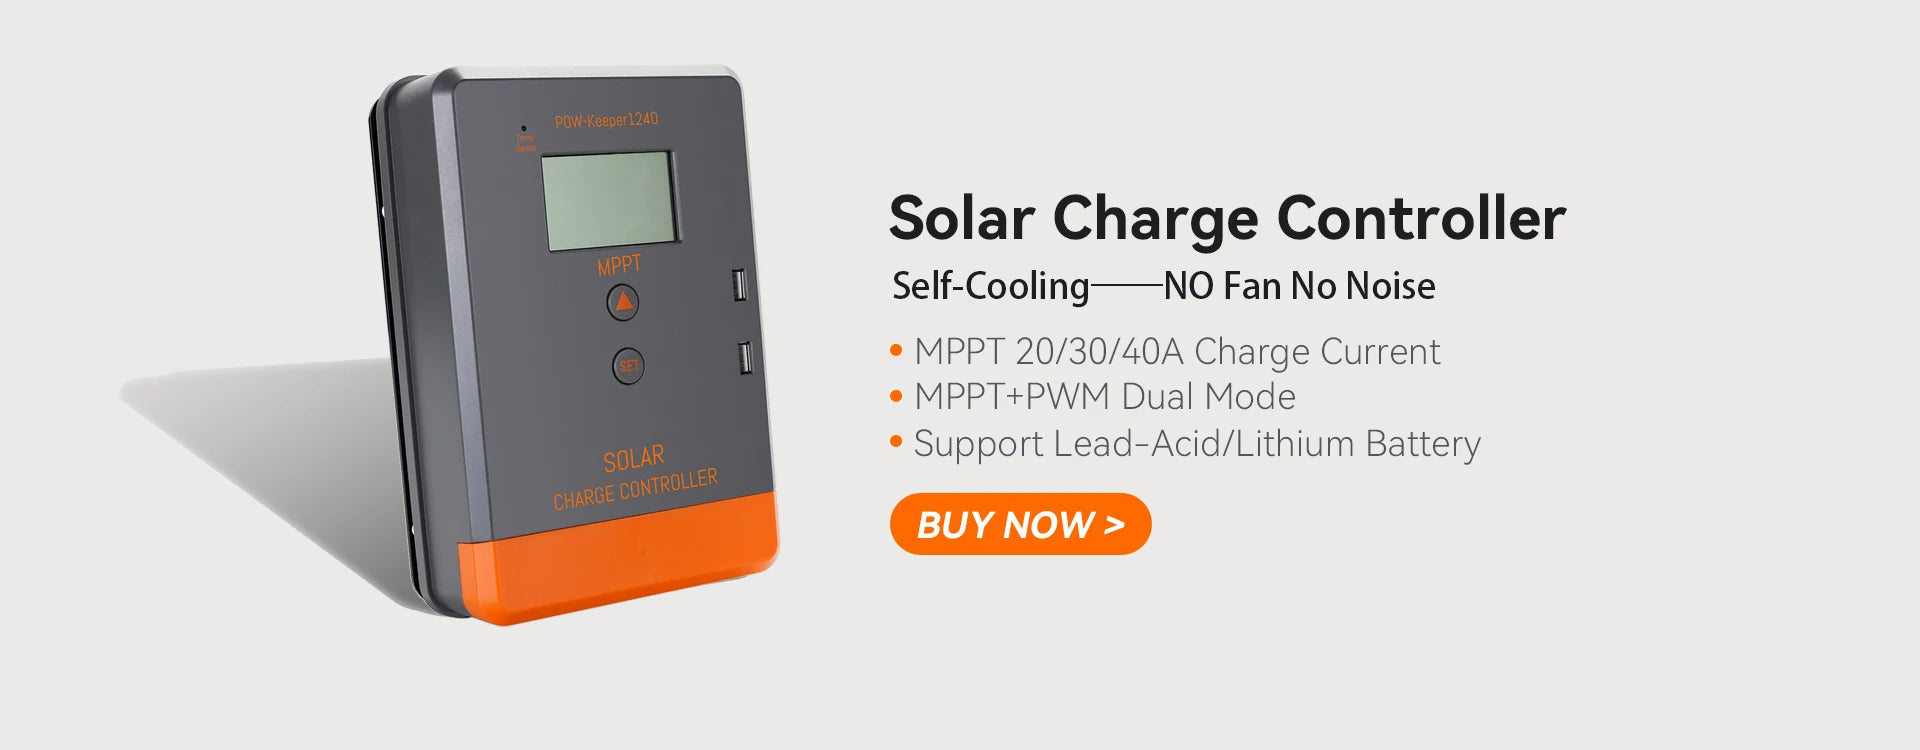 PowMr Solar Charge Controller, Solar charge controller with self-cooling, suitable for 12V/24V lead-acid/lithium batteries, supporting up to 20/30/40A charge currents.